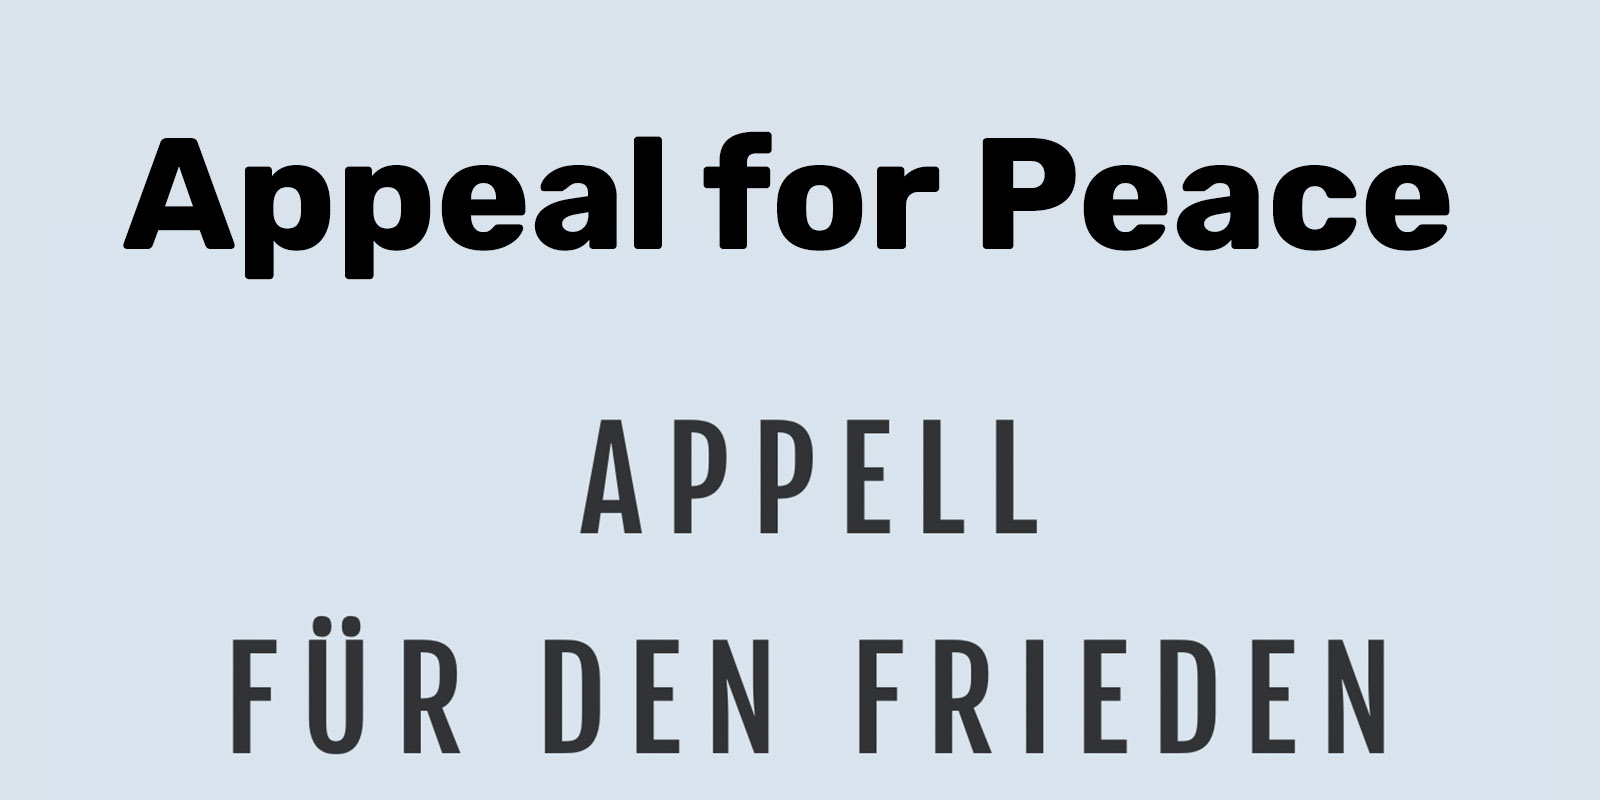 Appeal For Peace